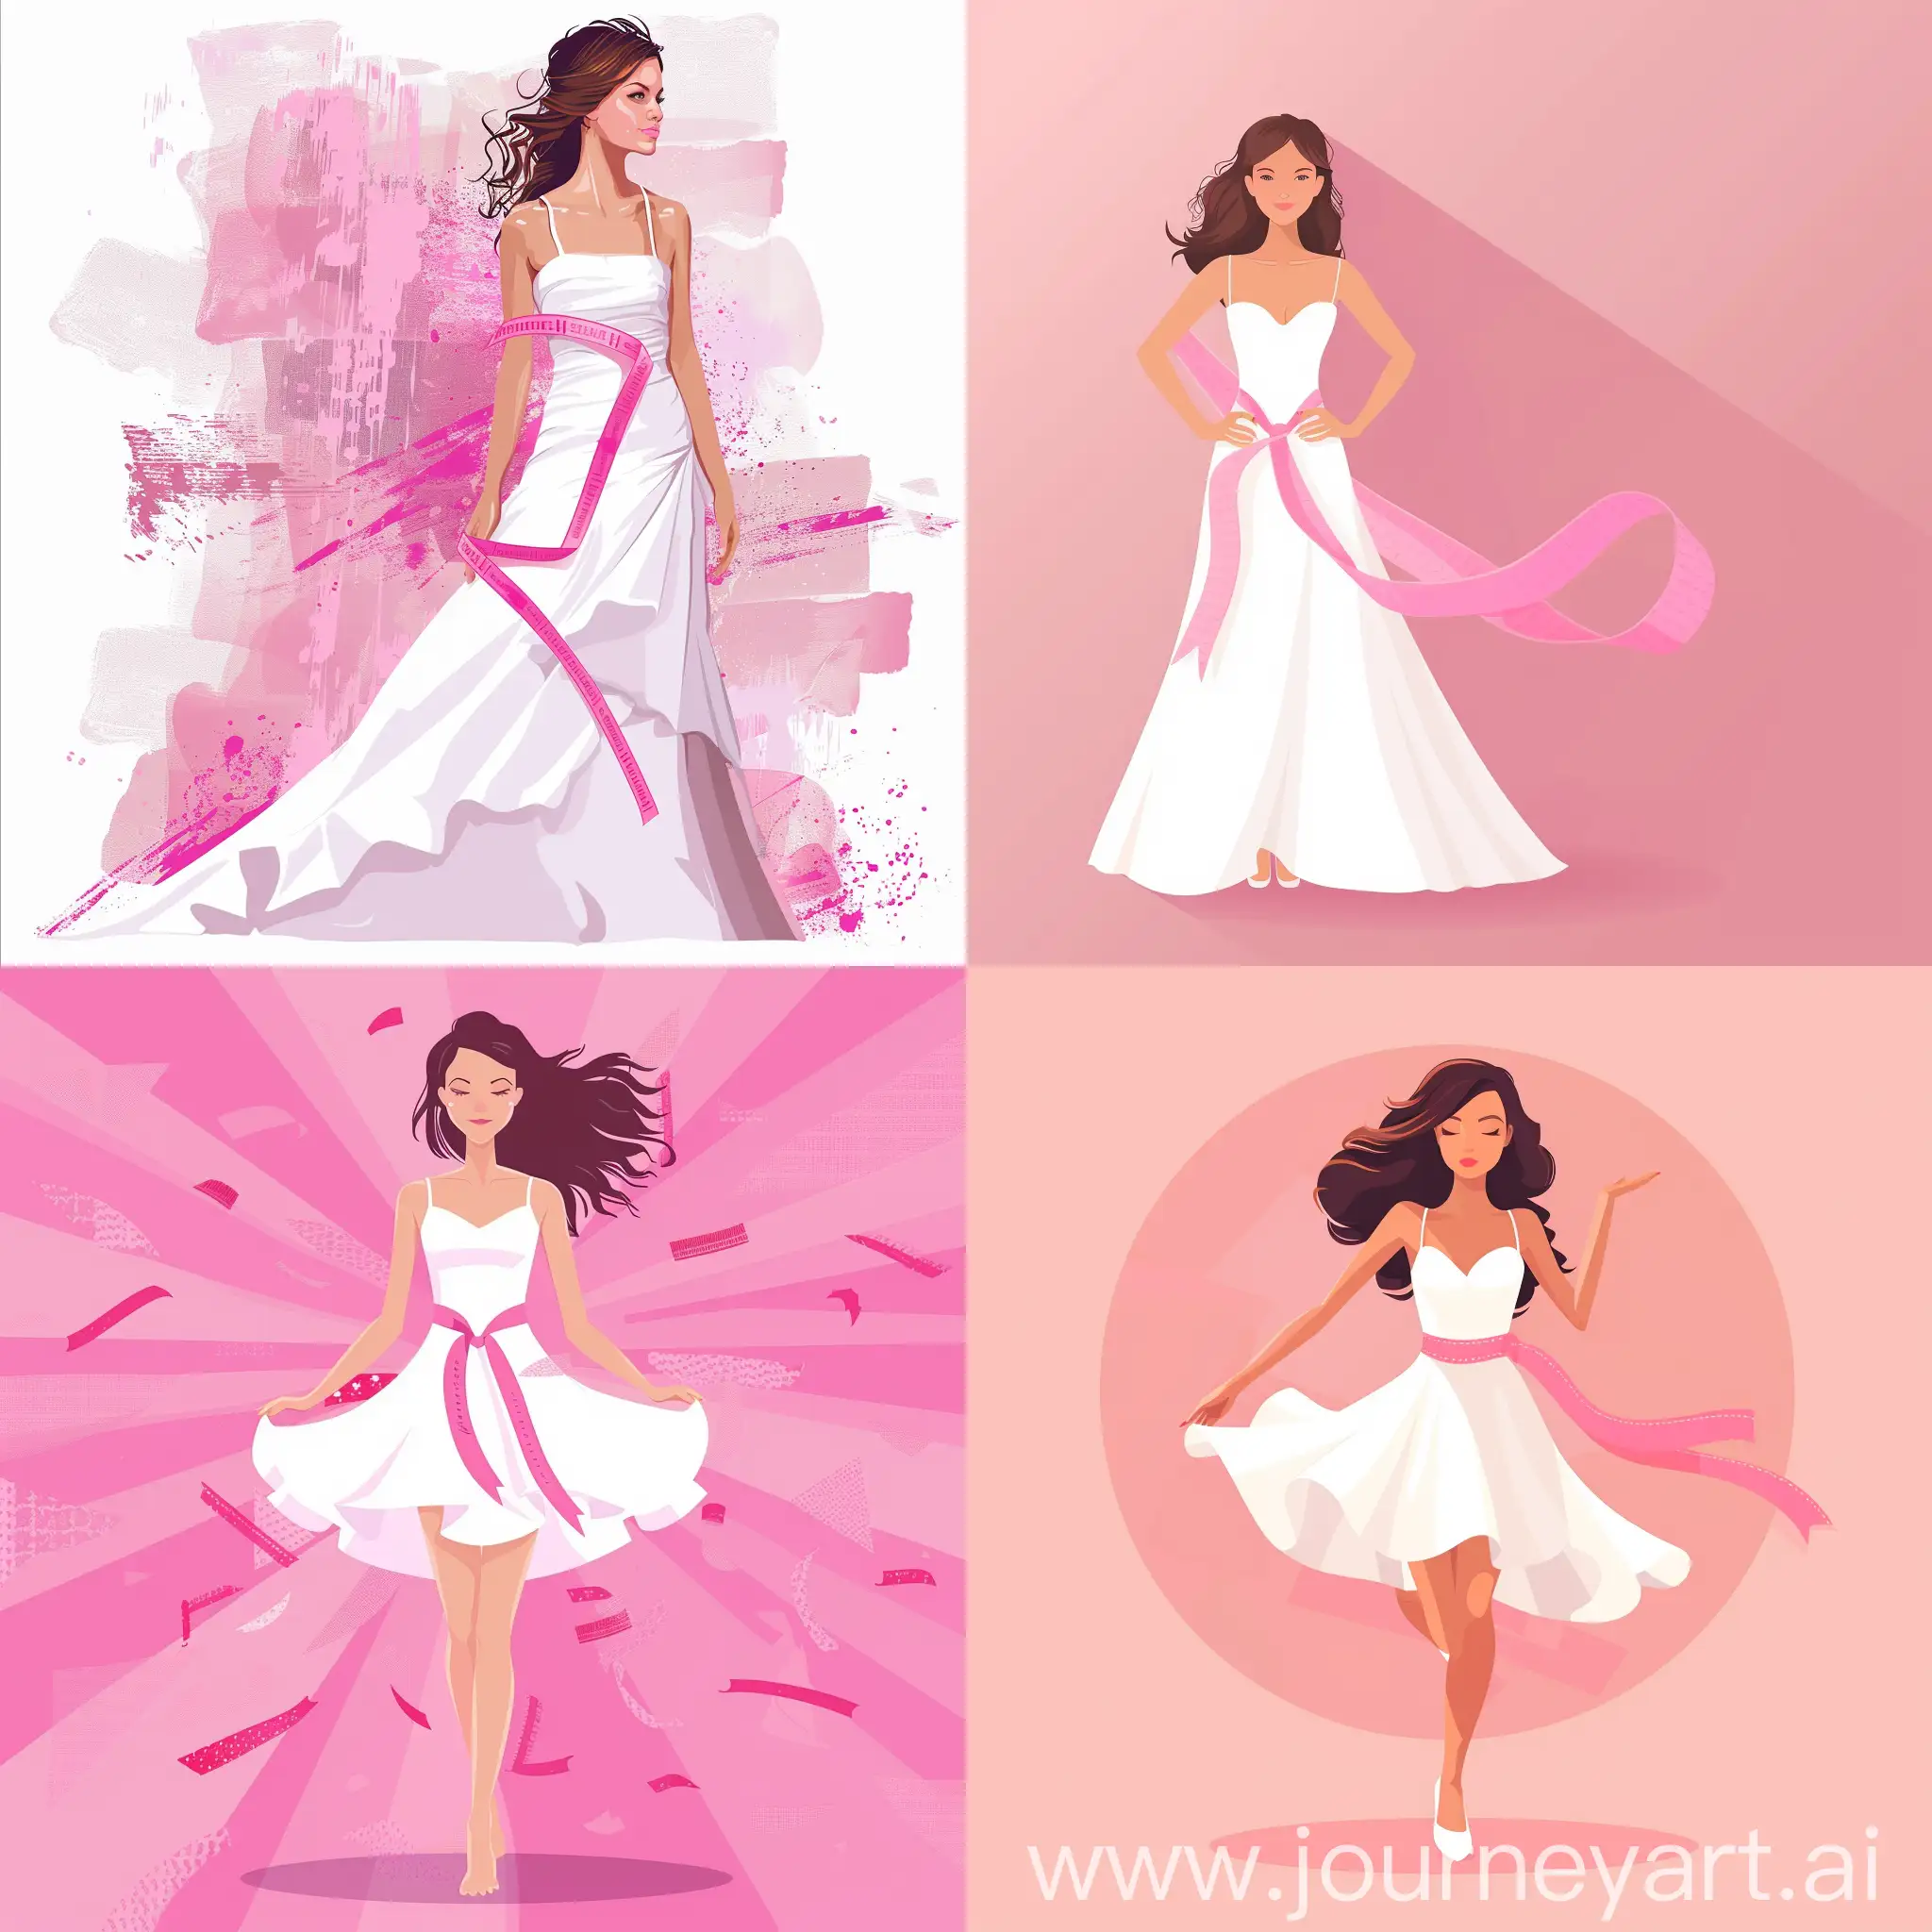 vector illustration, minimalism, a beautiful girl in a white dress with a pink ribbon - a sign of victory over breast cancer, illustration of pink shades

